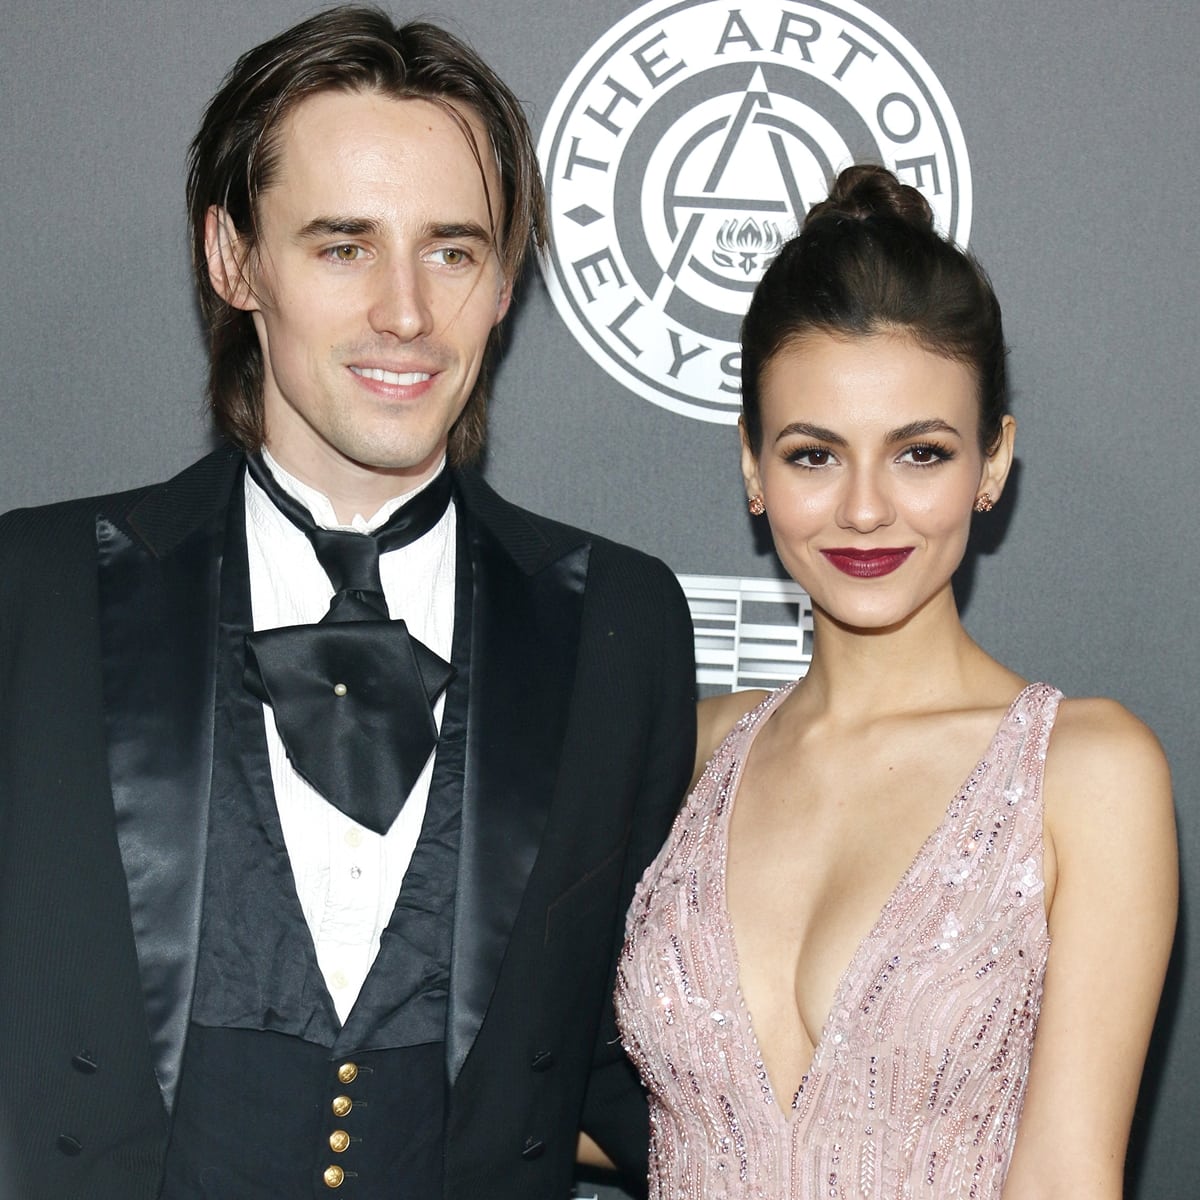 Victoria Justice, 23, is reportedly dating Reeve Carney, 33, after meeting during the filming of the Rocky Horror Picture Show, marking a new romance for the actress this holiday season